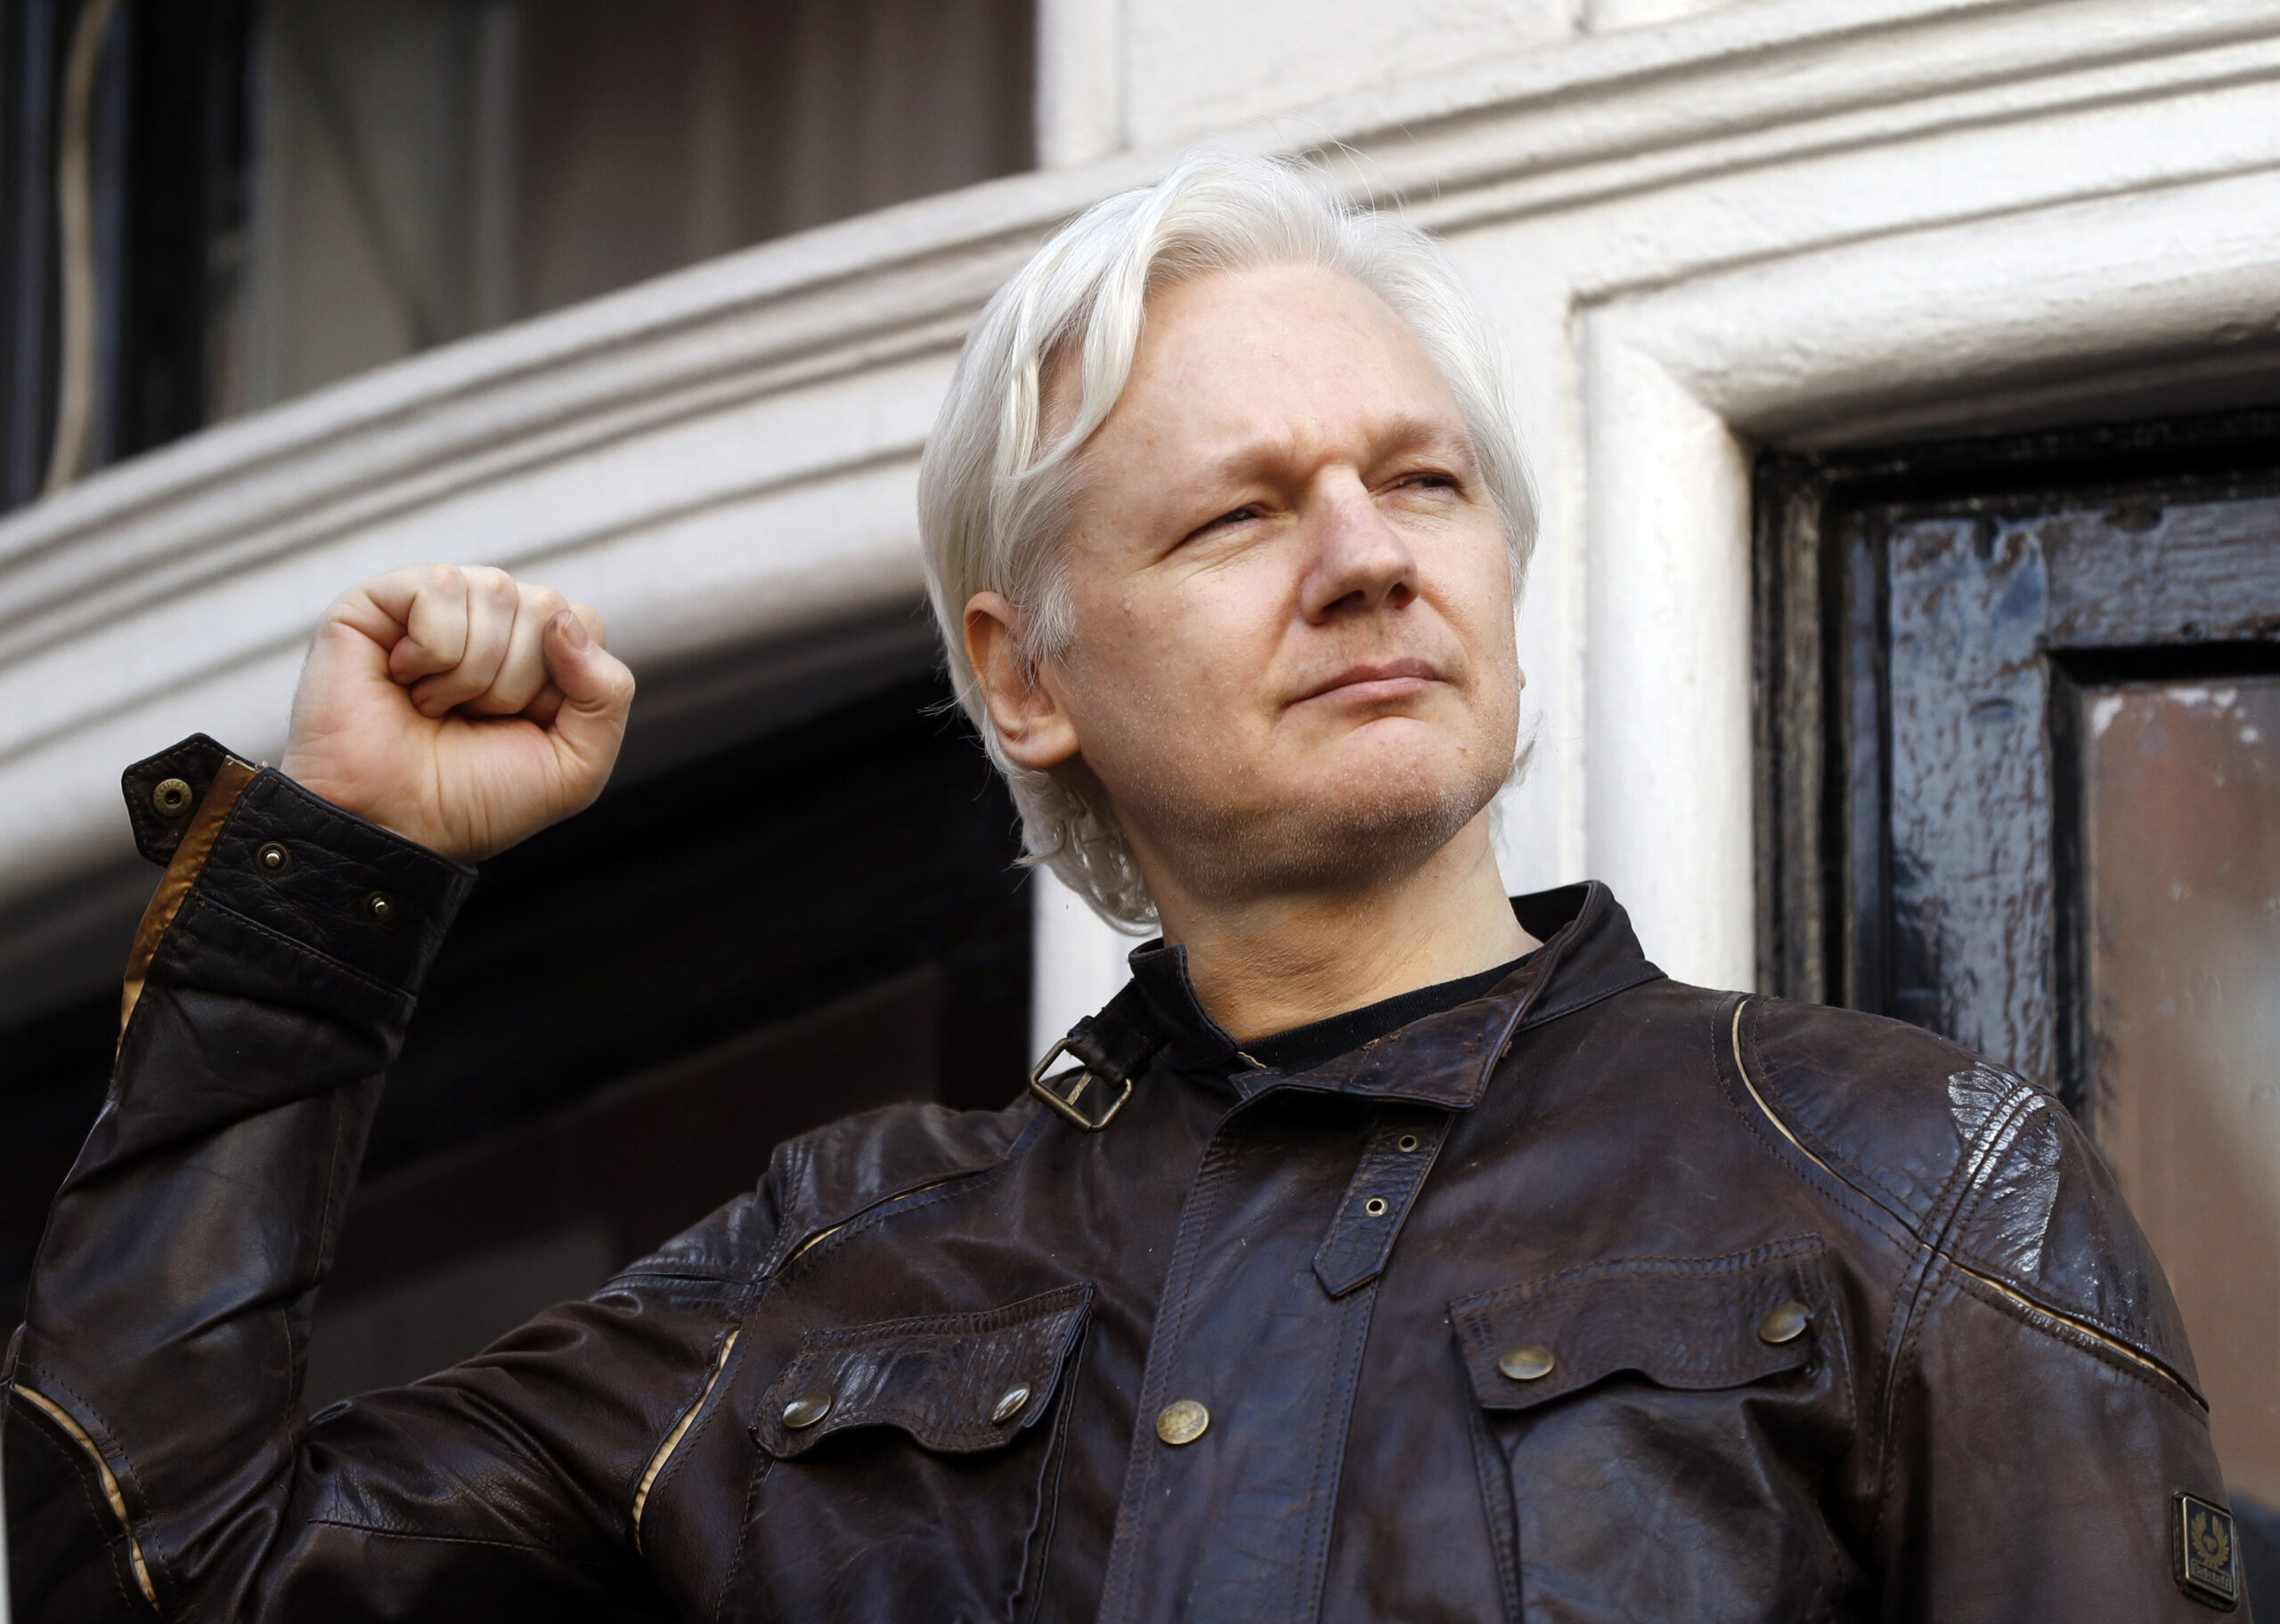 FILE - Julian Assange greets supporters outside the Ecuadorian embassy in London, May 19, 2017. WikiLeaks founder Julian Assange is facing what could be his final court hearing in England over whether he should be extradited to the United States to face spying charges. The High Court will hear two days of arguments next week over whether Assange can make his pitch to an appeals court to block his transfer to the U.S. (Foto: AP Photo/Frank Augstein, File)